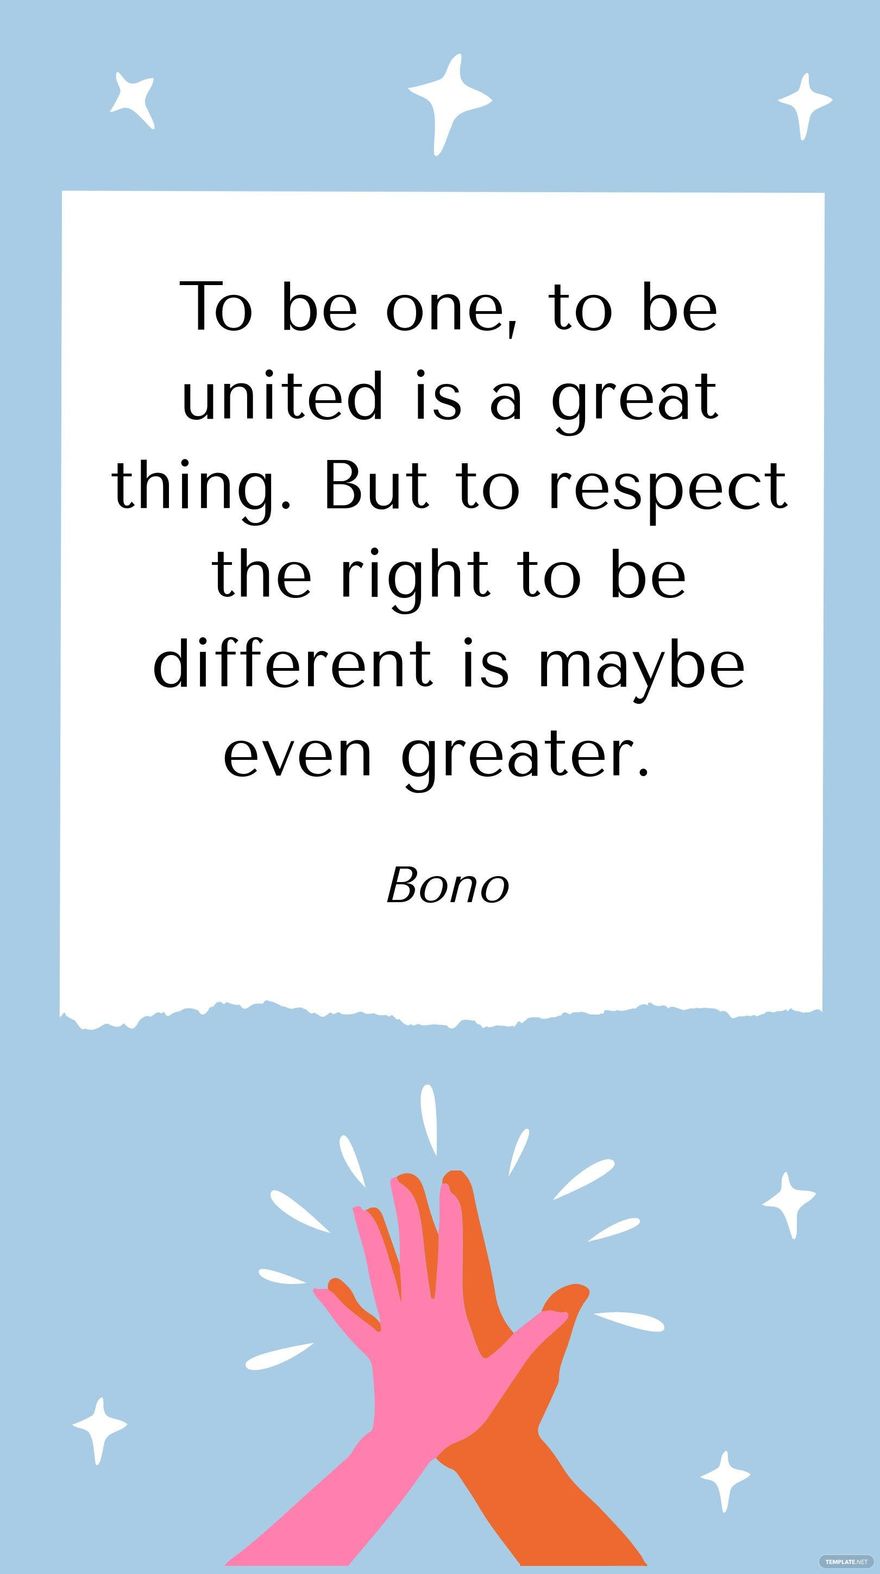 Bono - To be one, to be united is a great thing. But to respect the right to be different is maybe even greater.